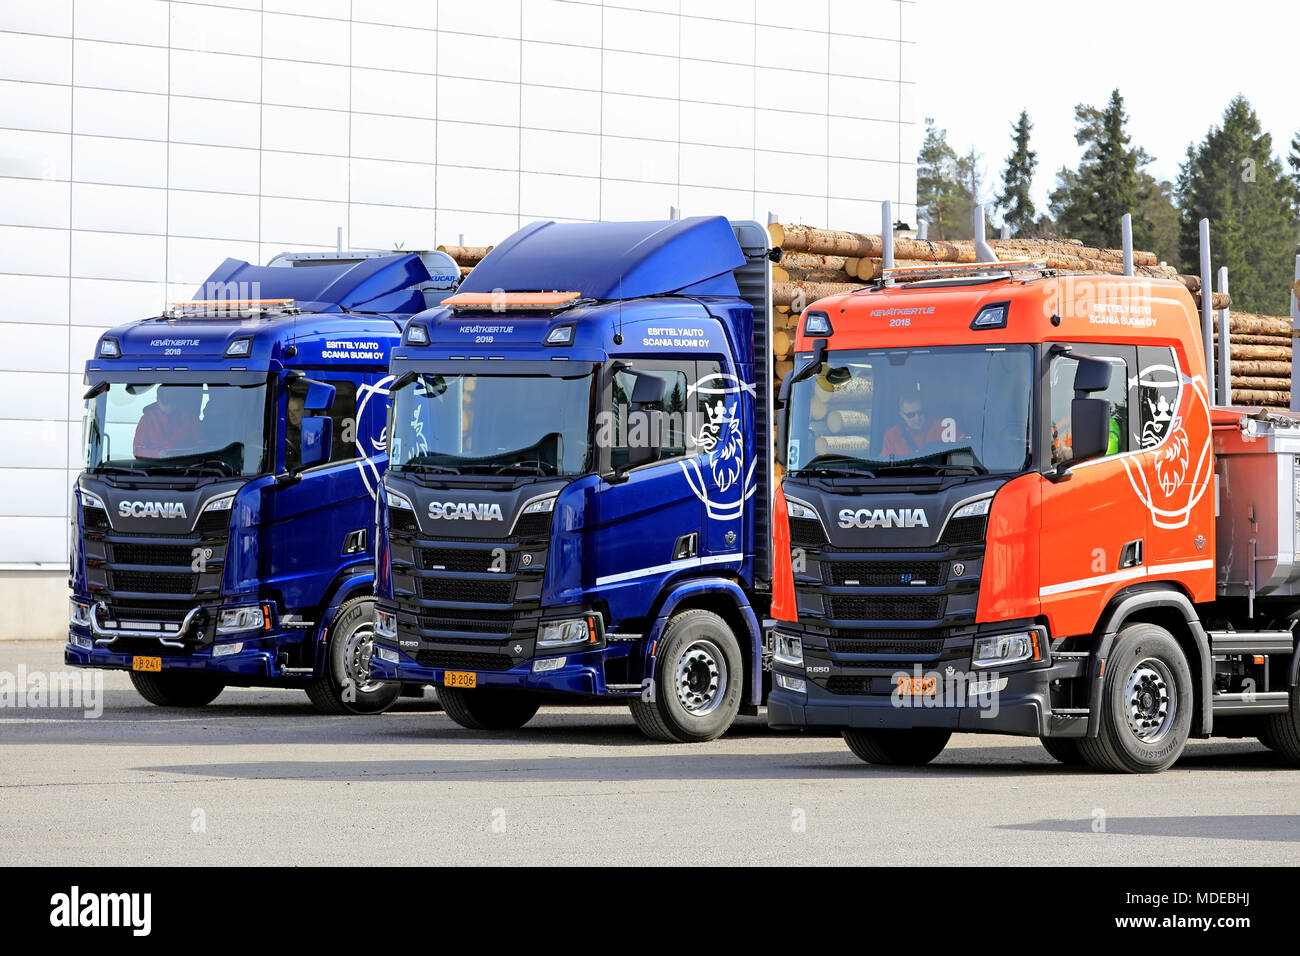 LIETO, FINLAND - APRIL 12, 2018: Three new Scania trucks, blue R730 and R650 for wood transport and orange R650 for construction during Scania Tour 20 Stock Photo